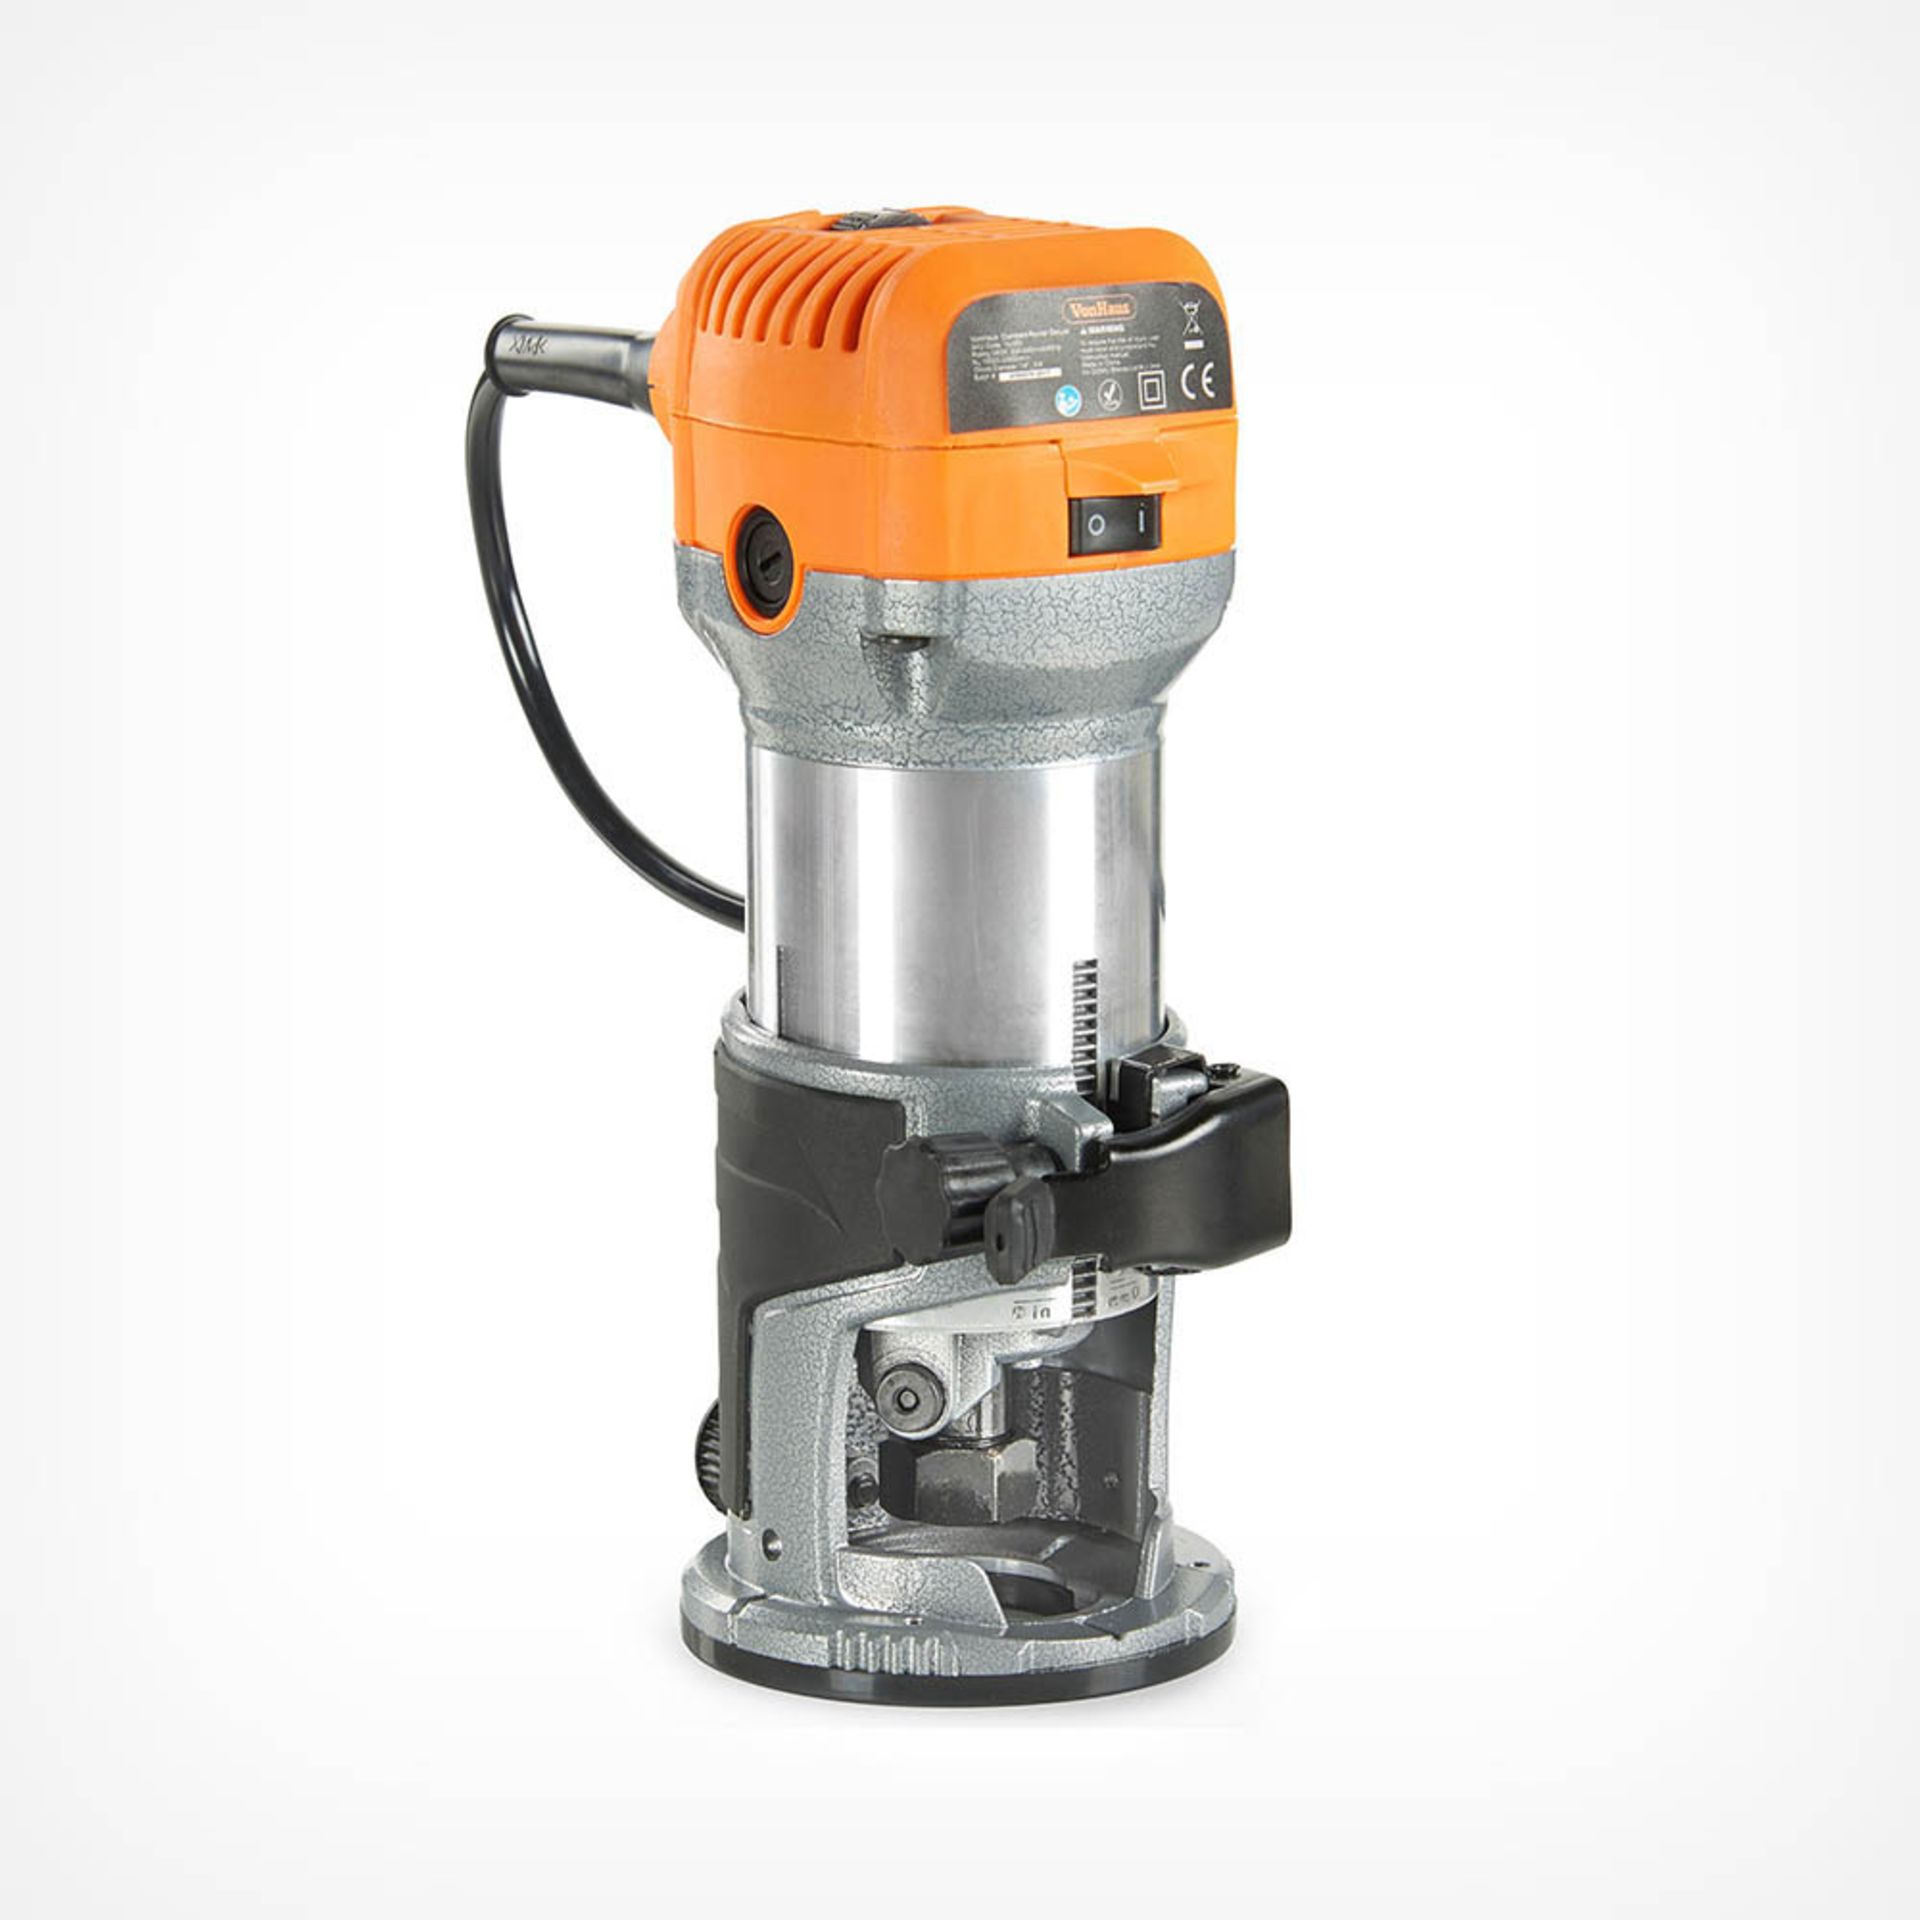 Compact Palm Router Saw - ER39